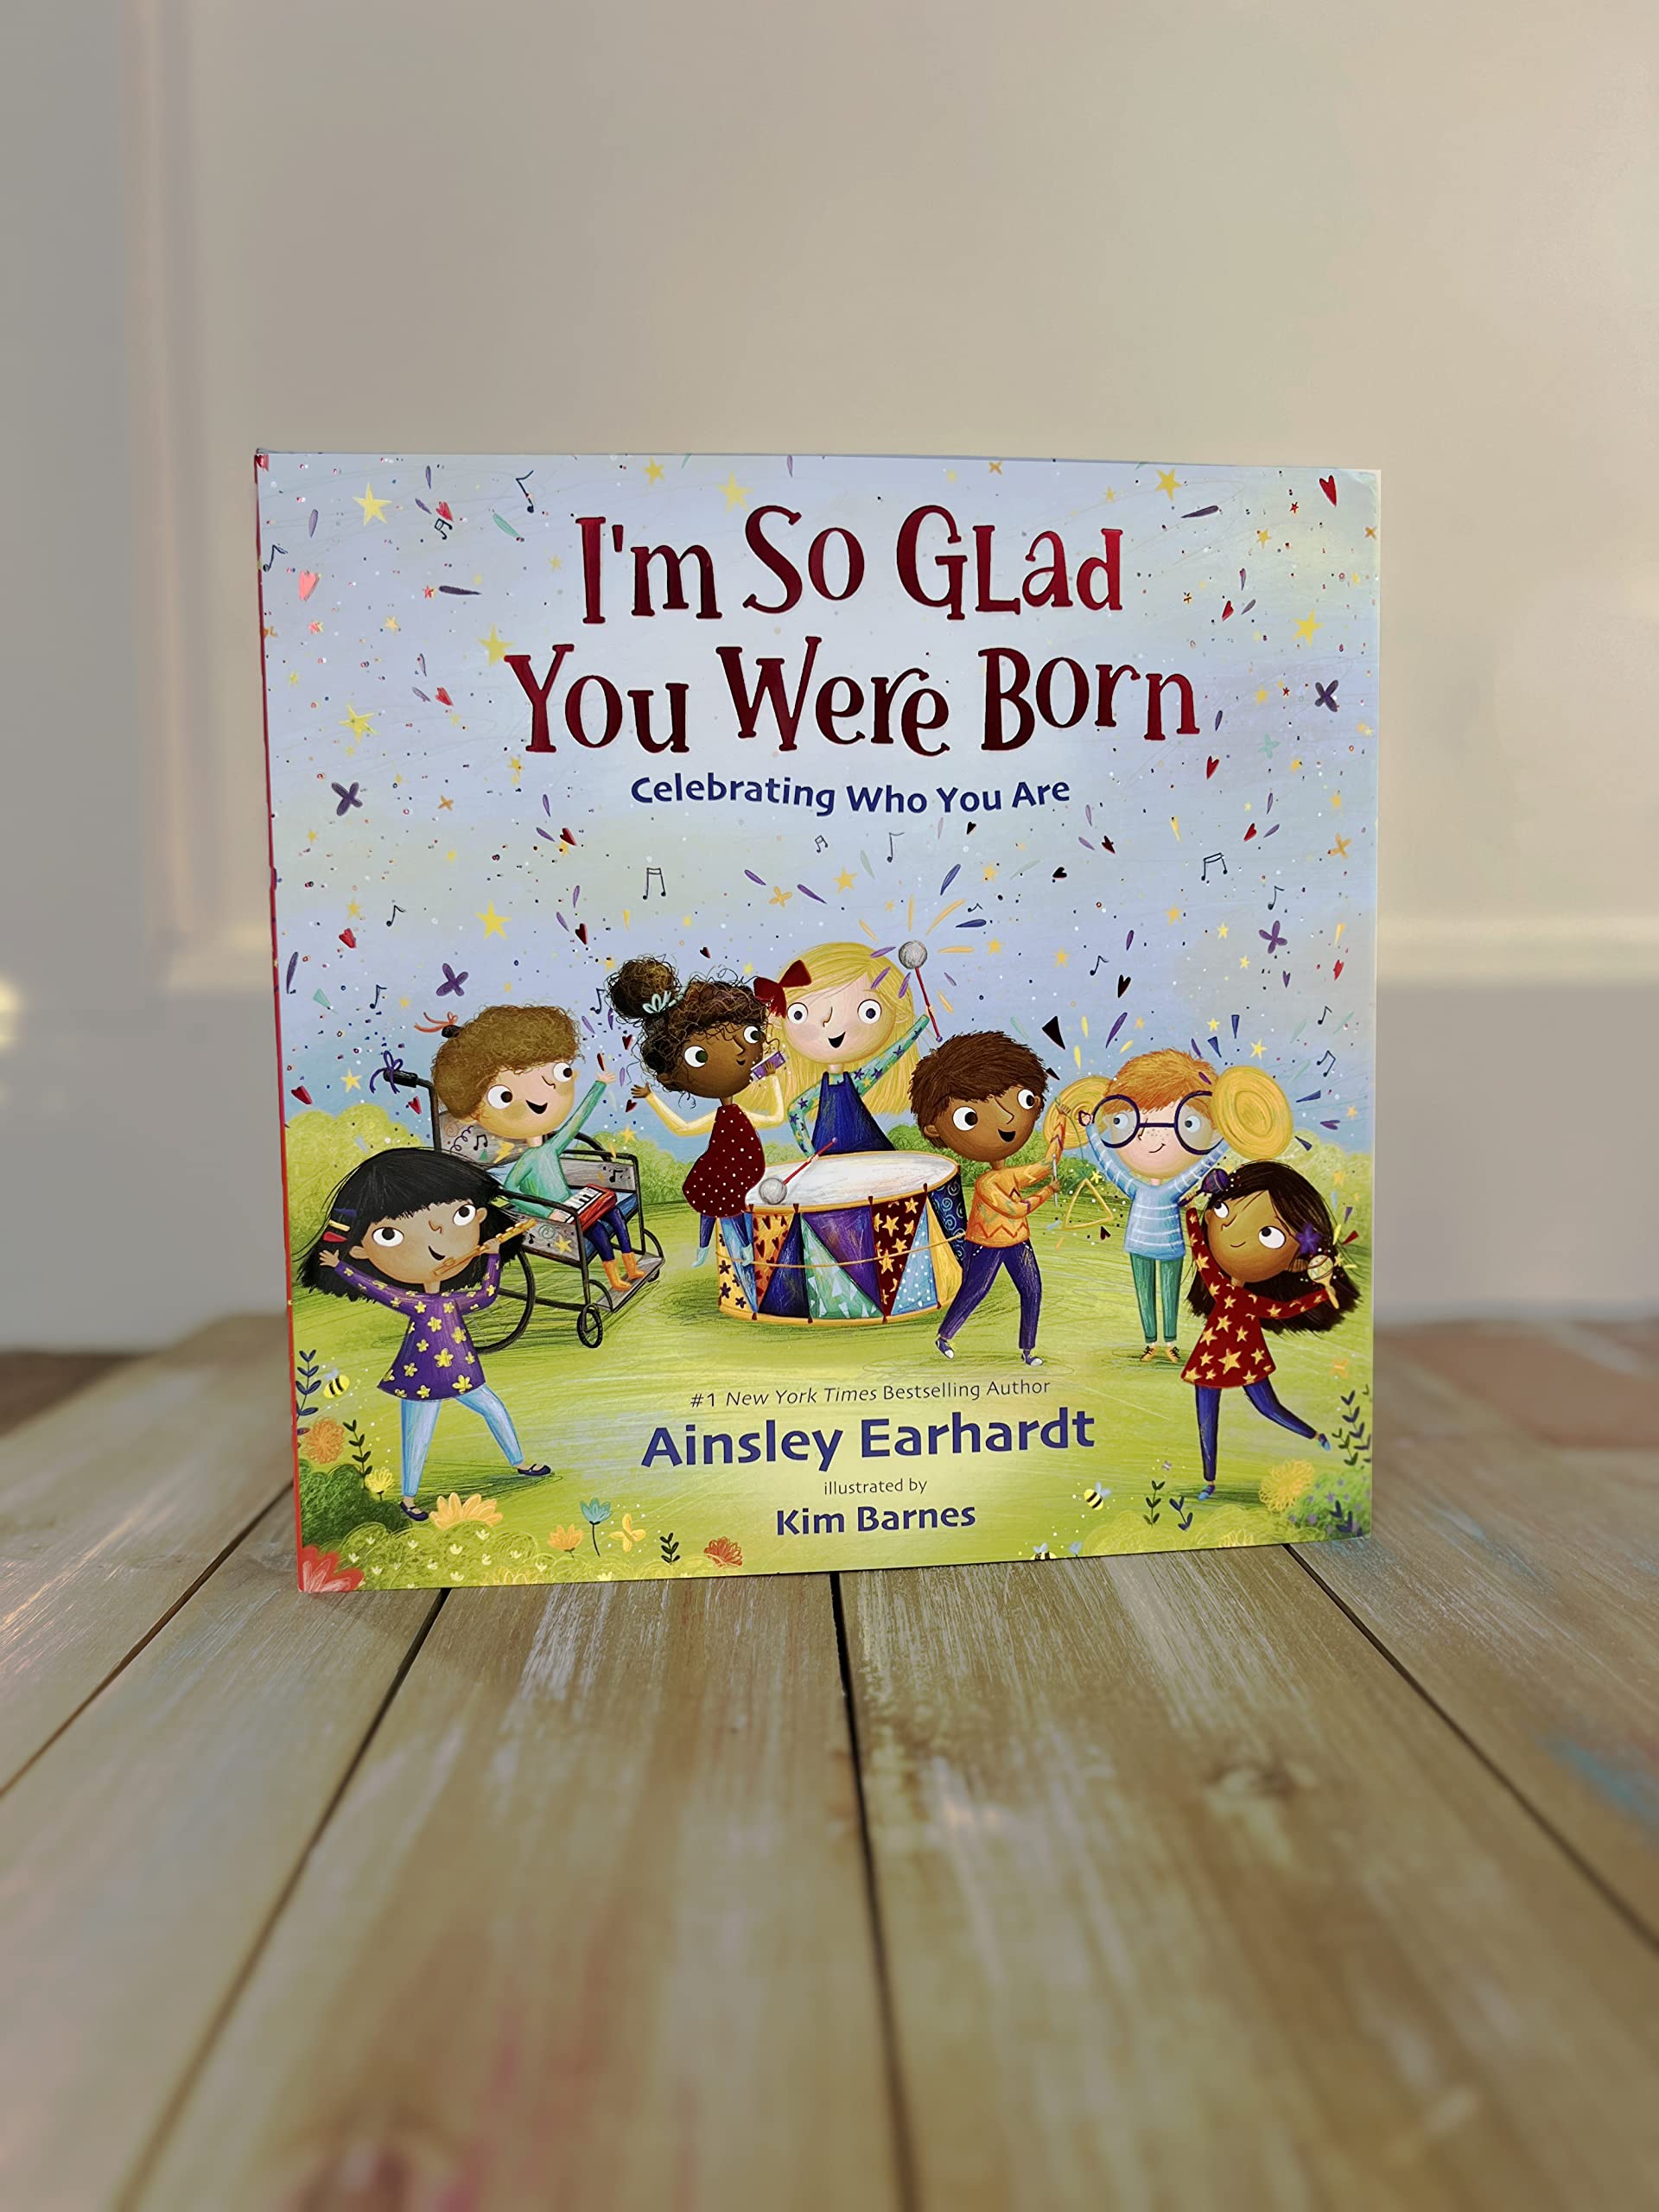 I'm So Glad You Were Born: Celebrating Who You Are